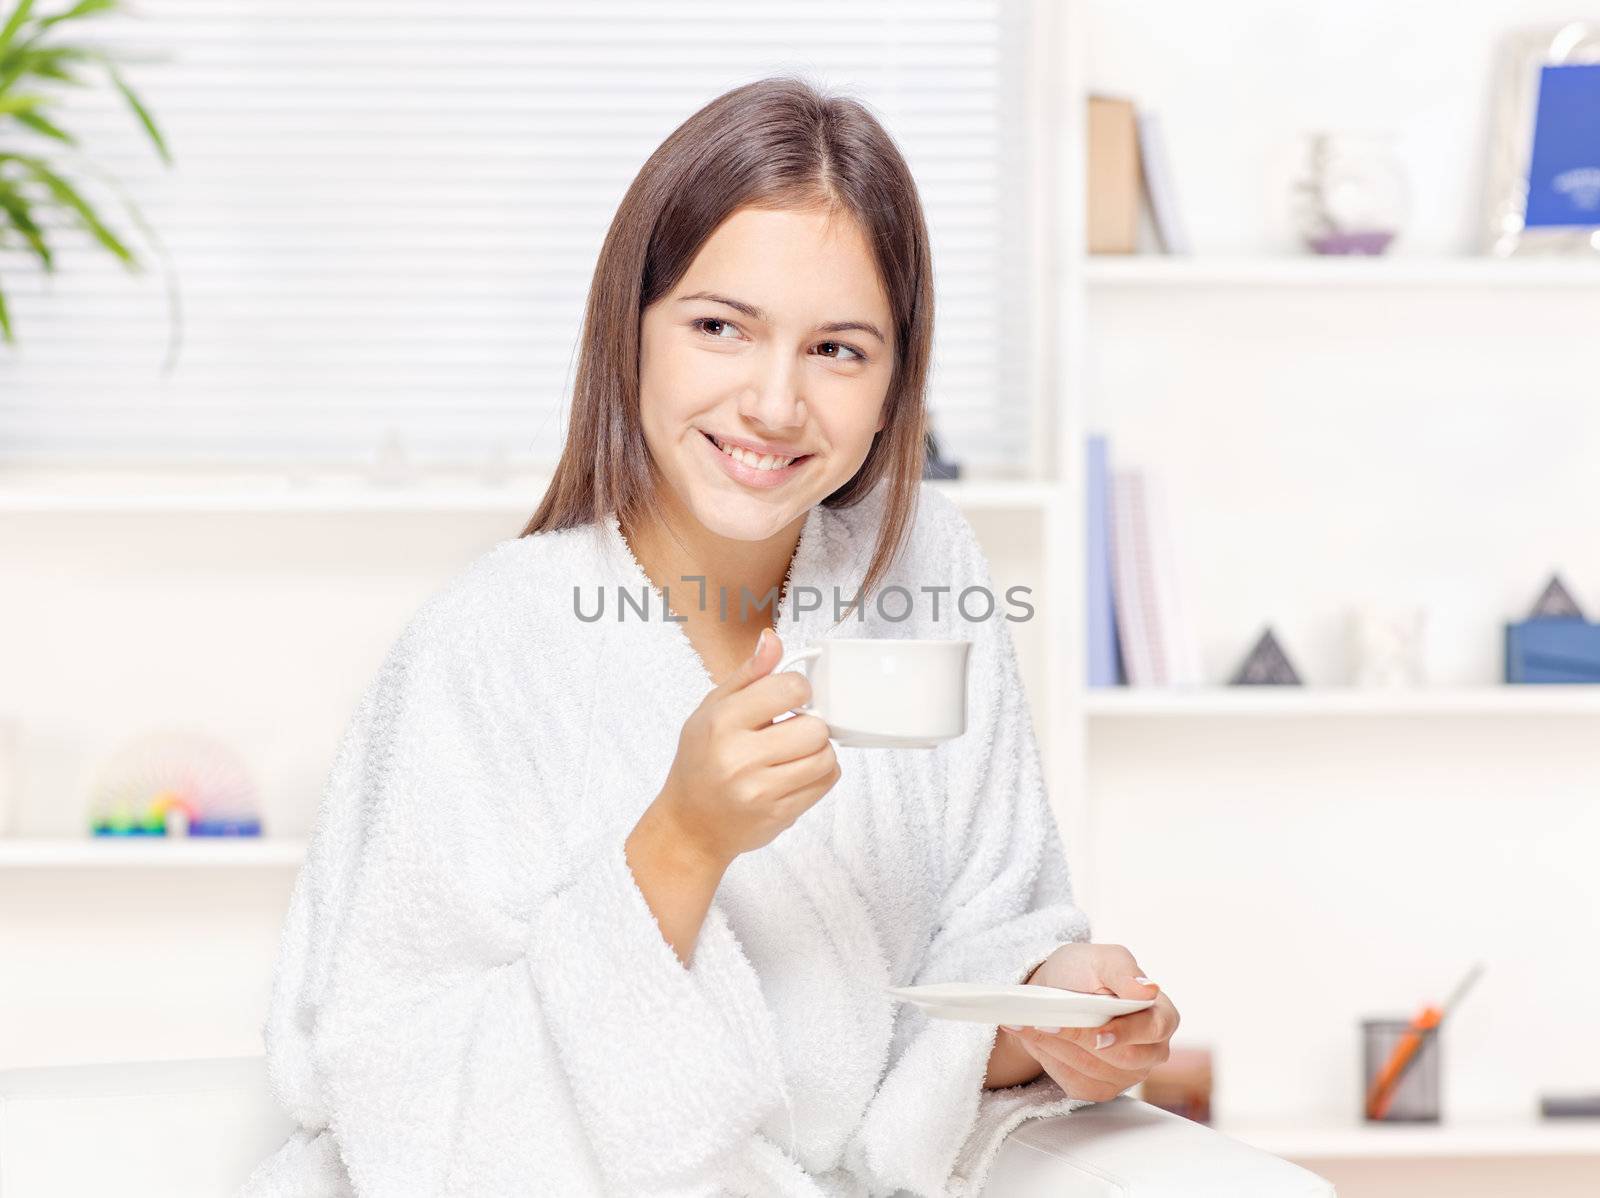 Woman in bathrobe relaxing at home by imarin